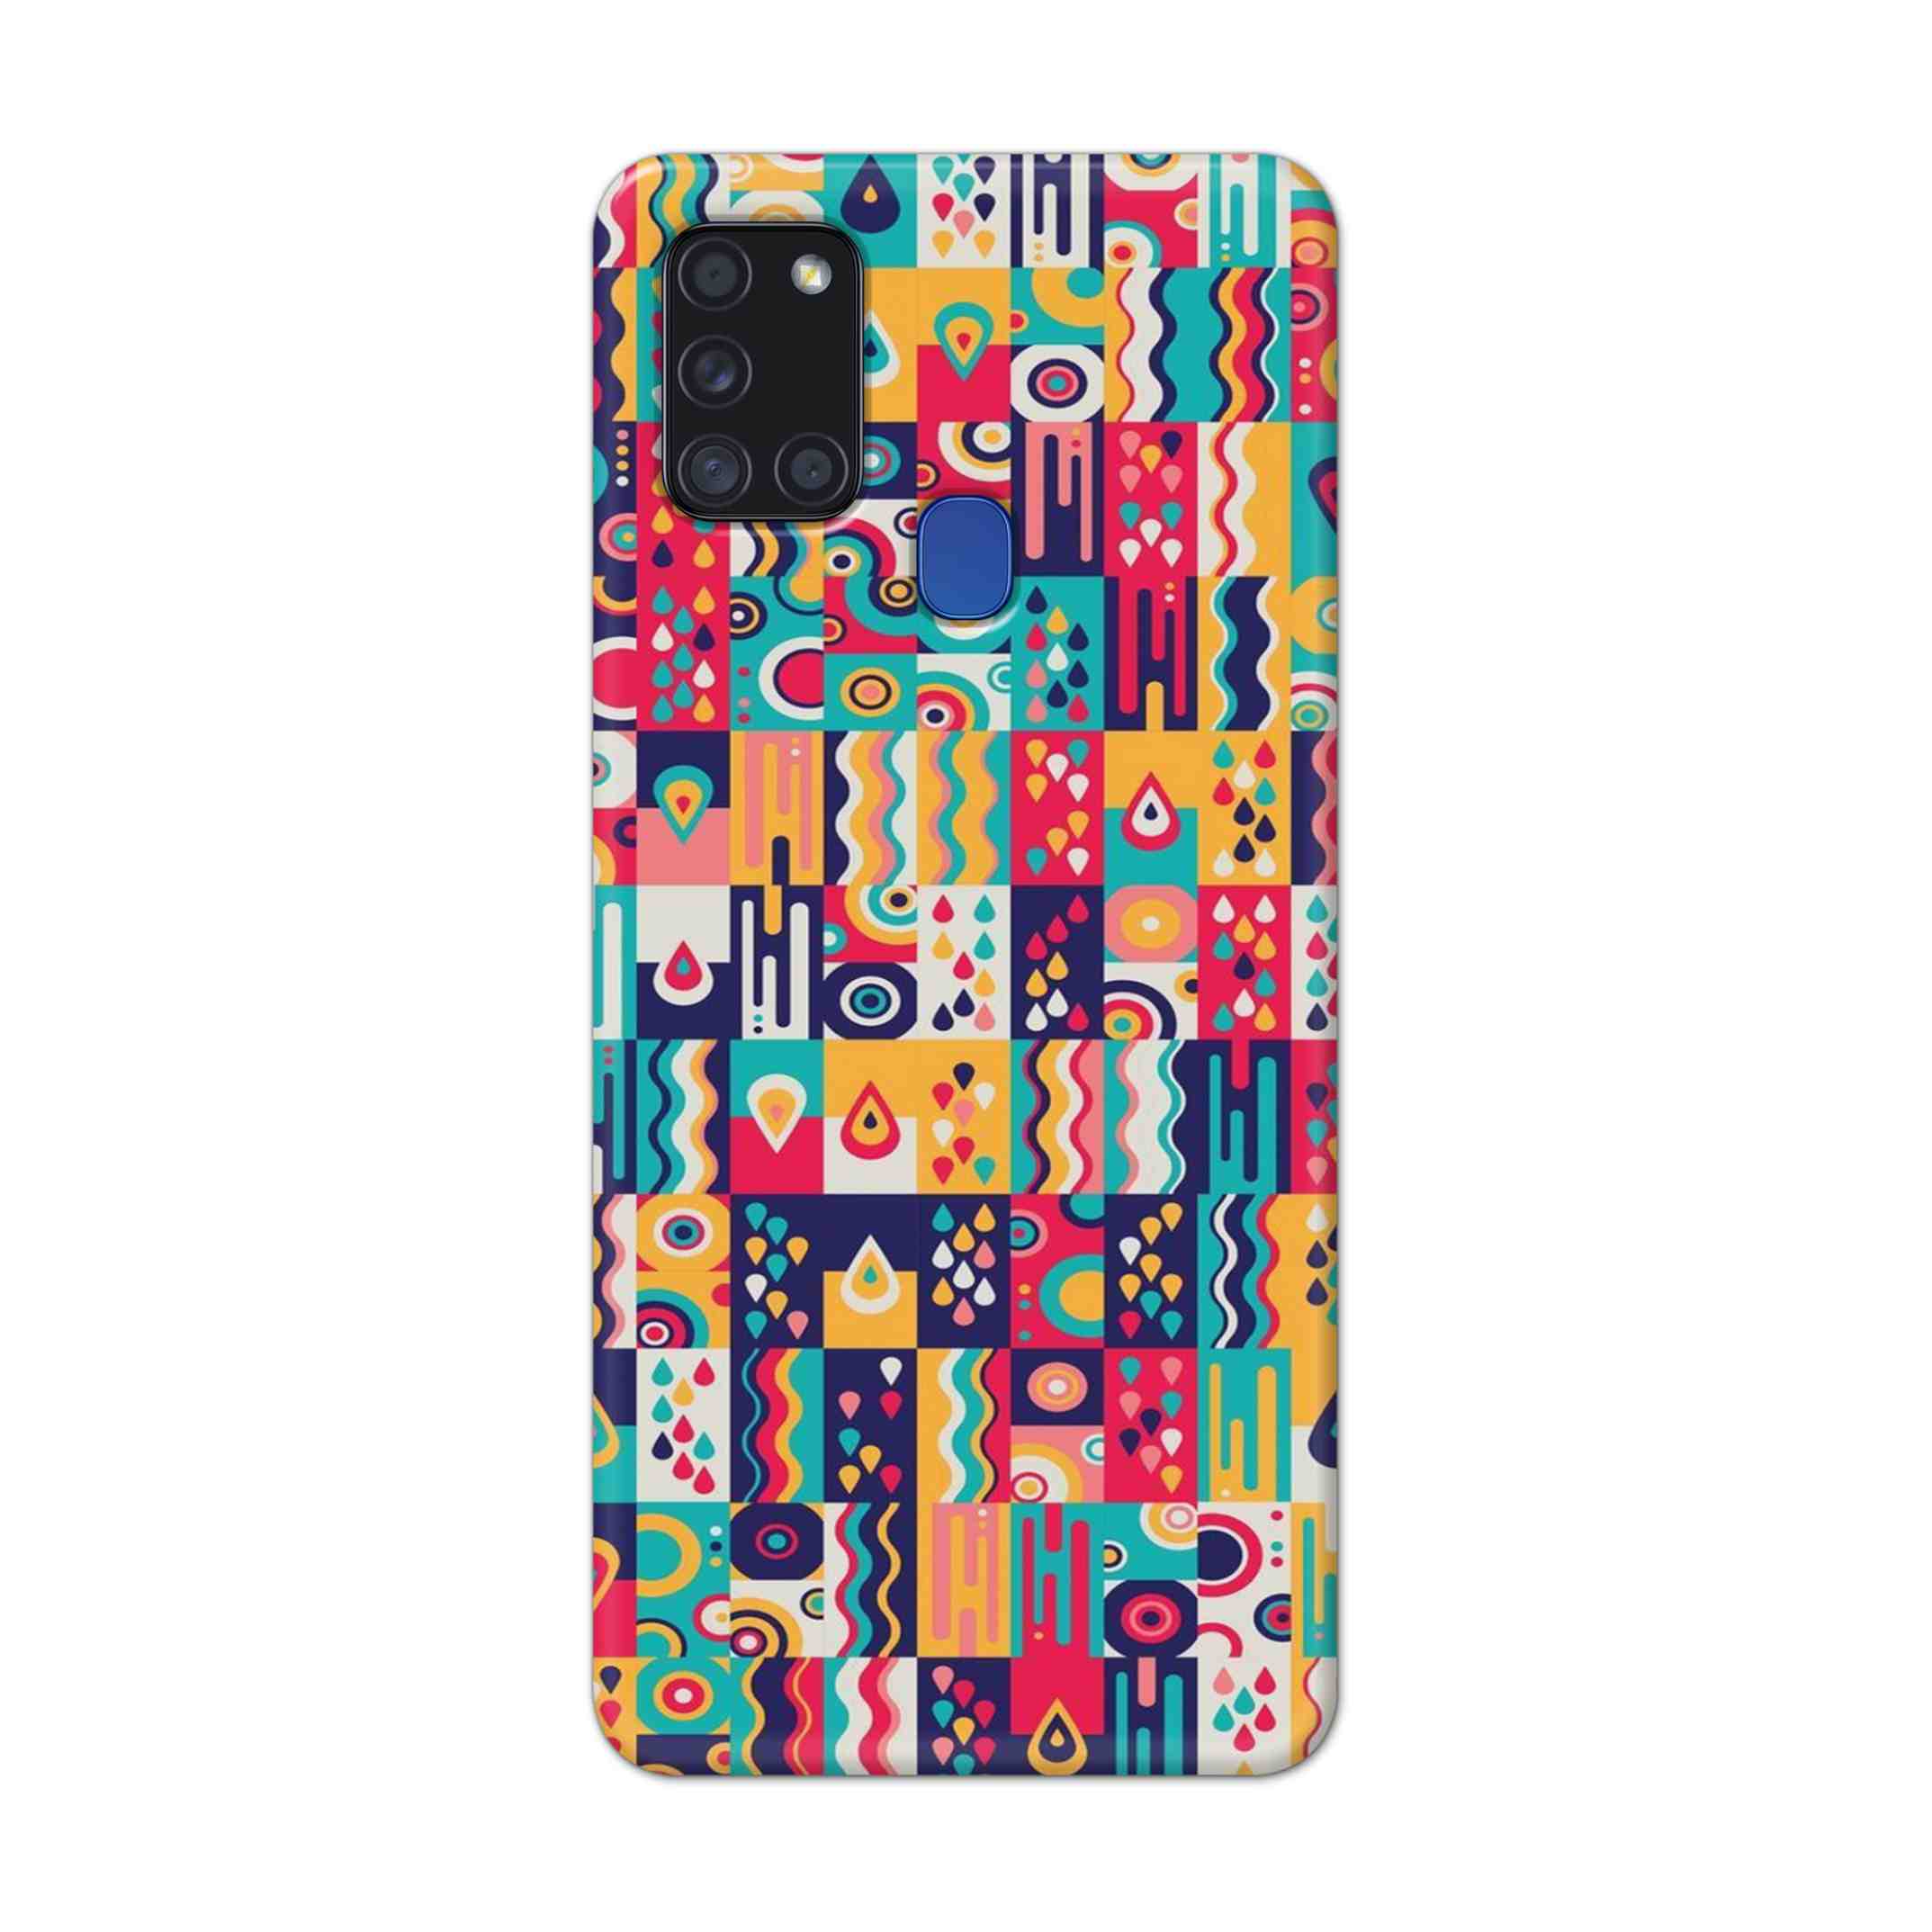 Buy Art Hard Back Mobile Phone Case Cover For Samsung Galaxy A21s Online